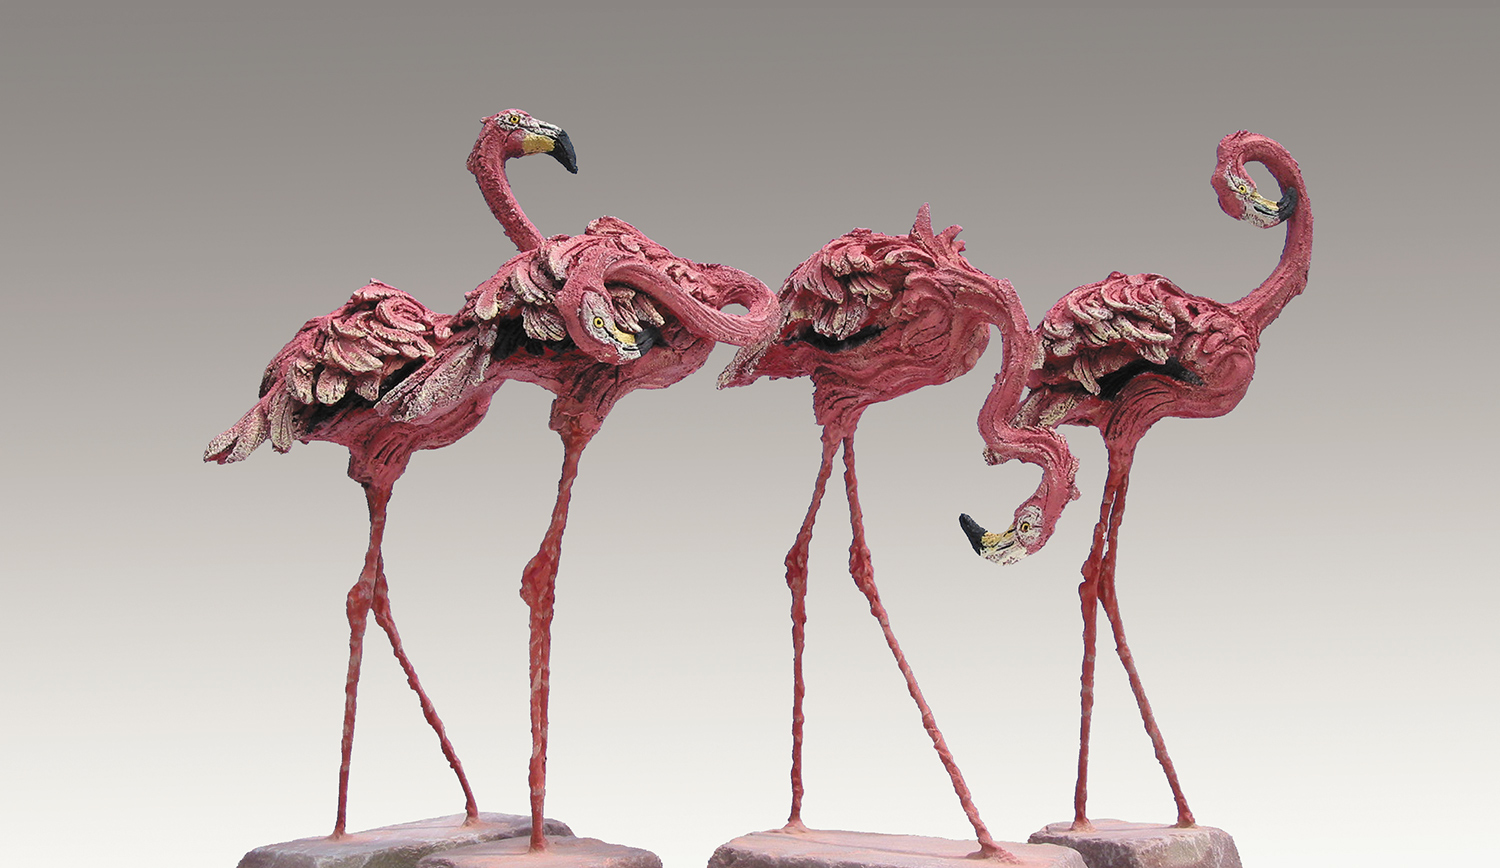  Flocking Pink &nbsp; ©  63 cm high x 83 cm wide (size of group of 4)  Unique 